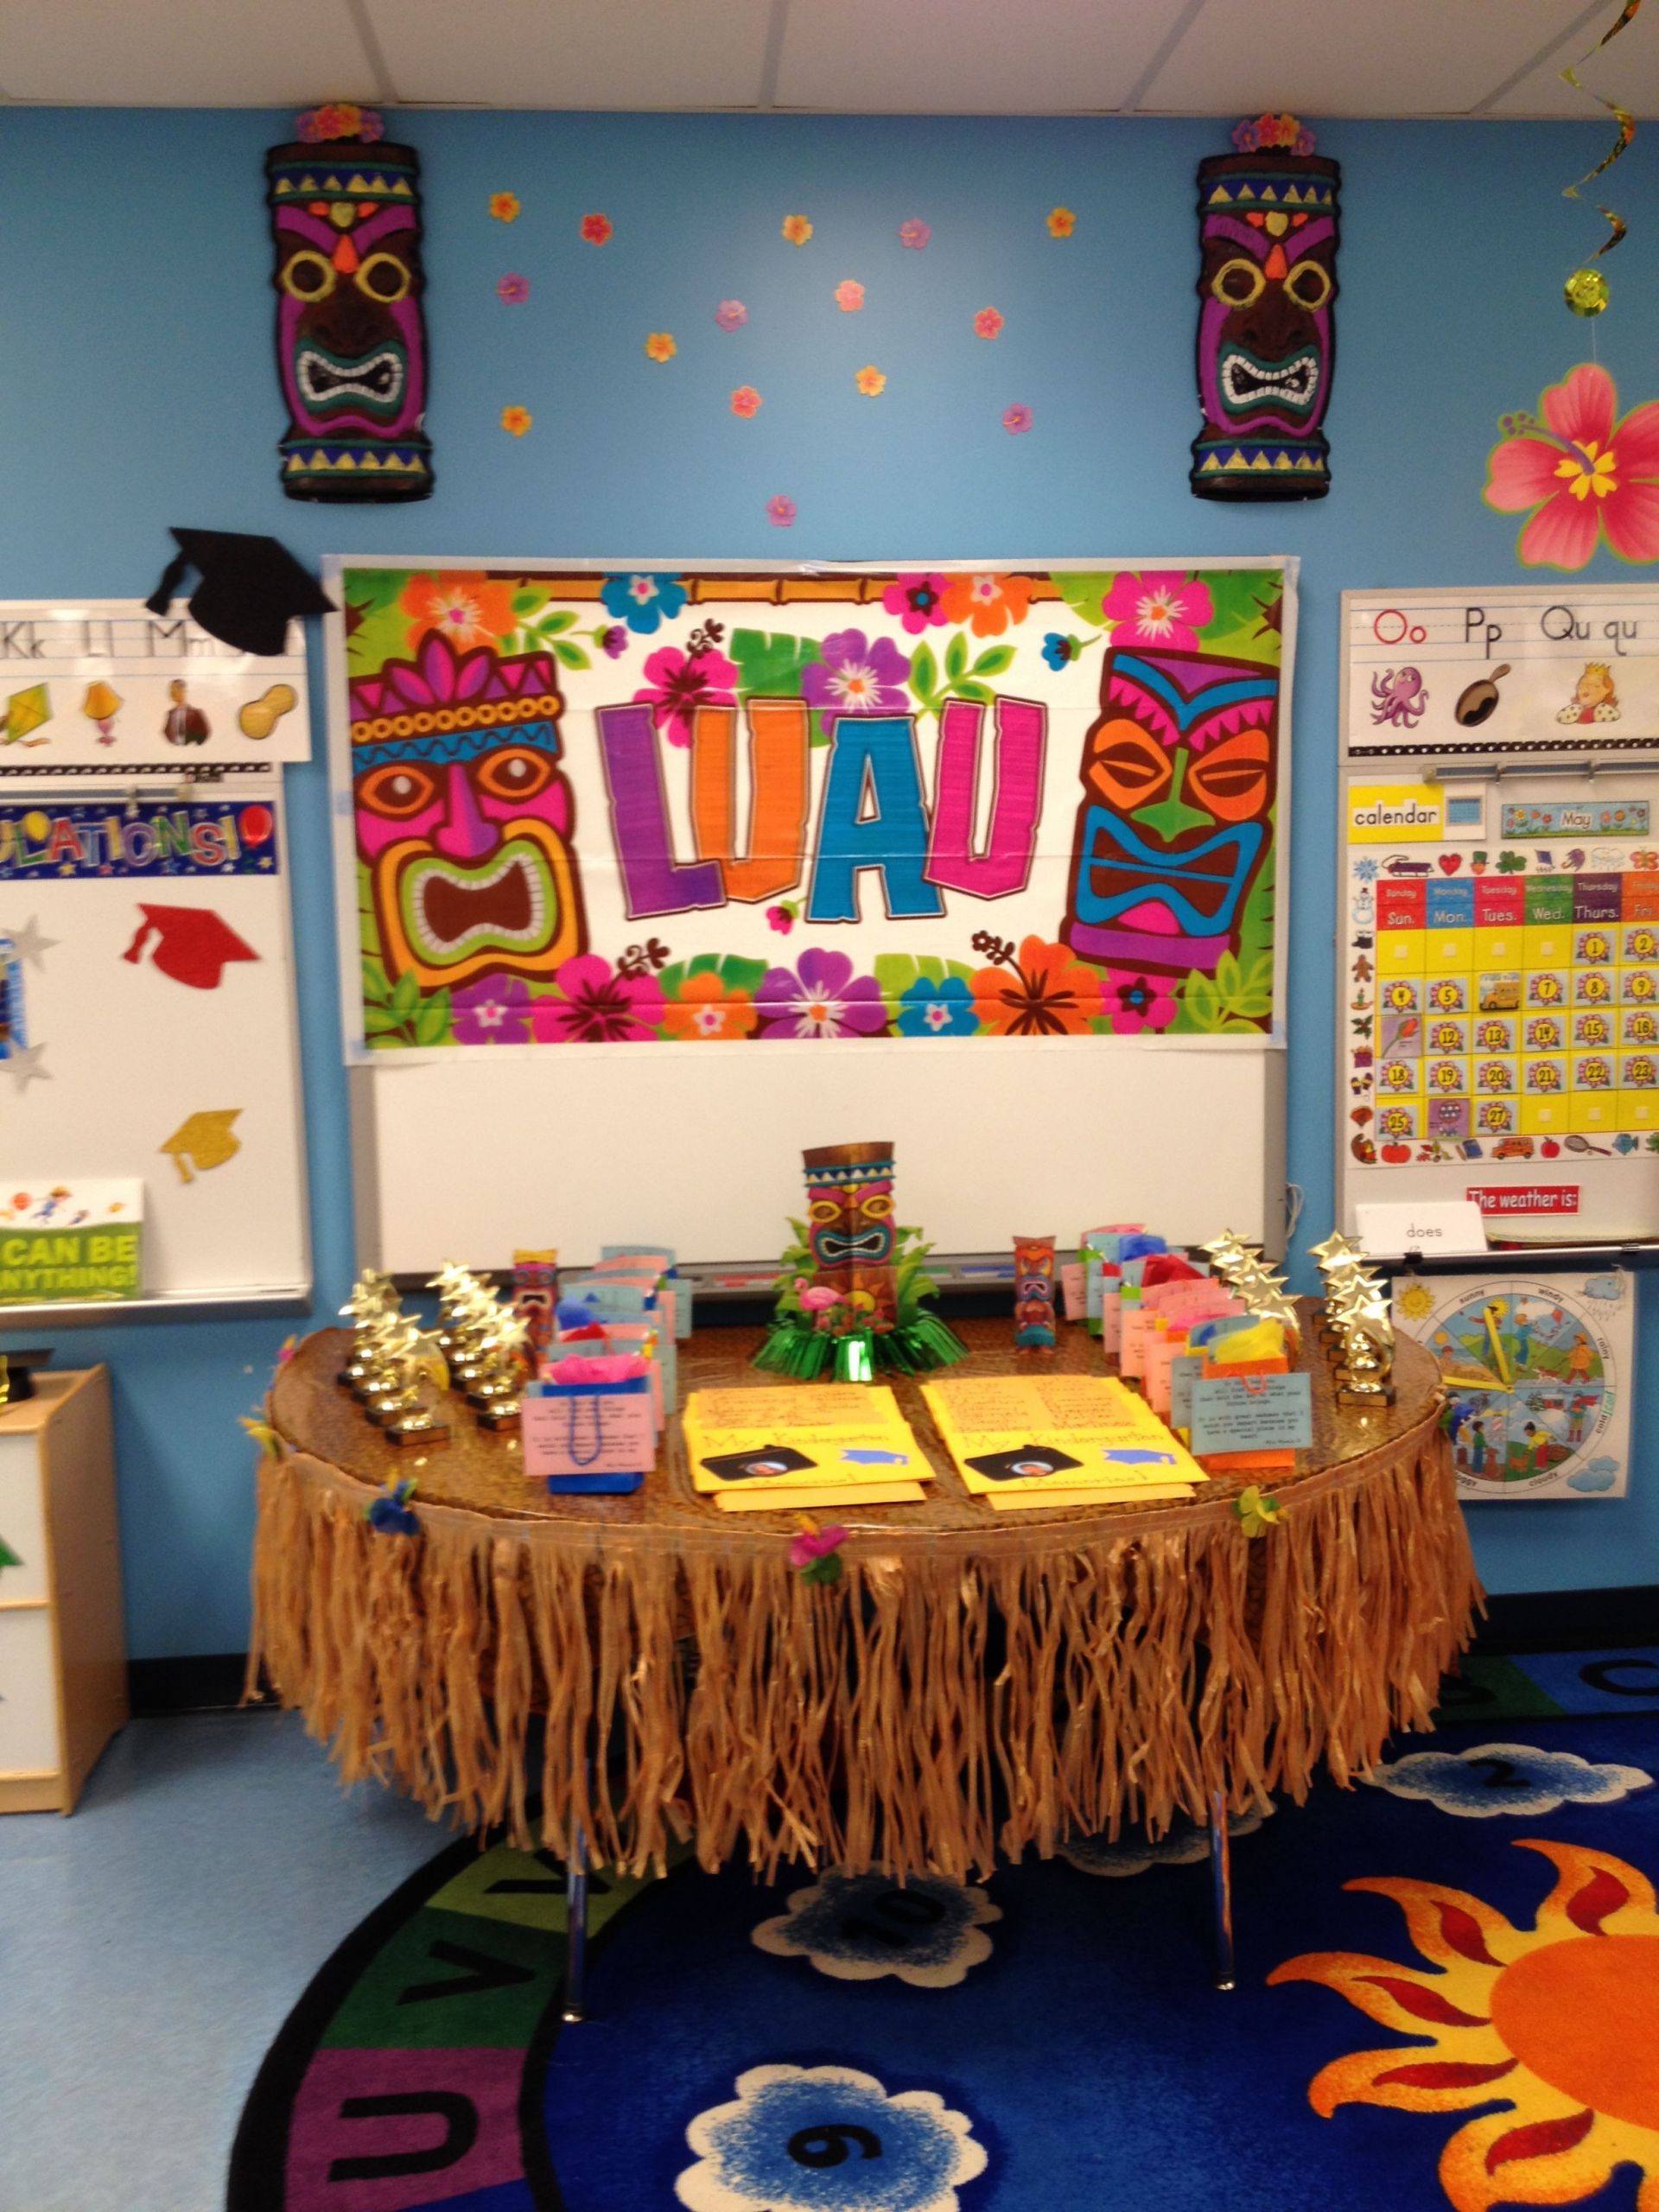 Beach Party Ideas For Kindergarten
 "Luau" end of the year celebration